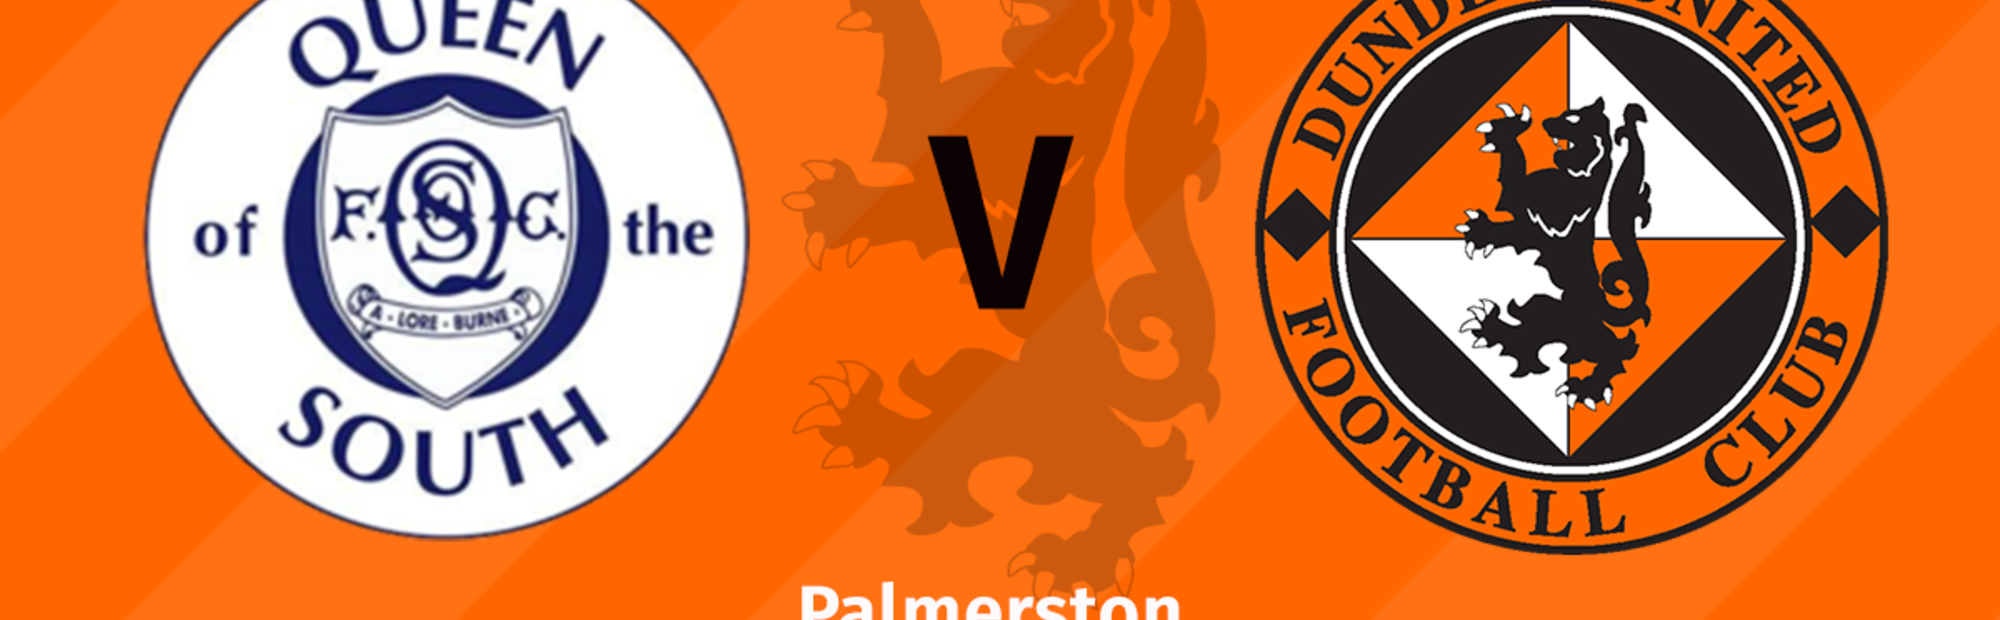 Our first match of the 2020 is away at Palmerston on Saturday.